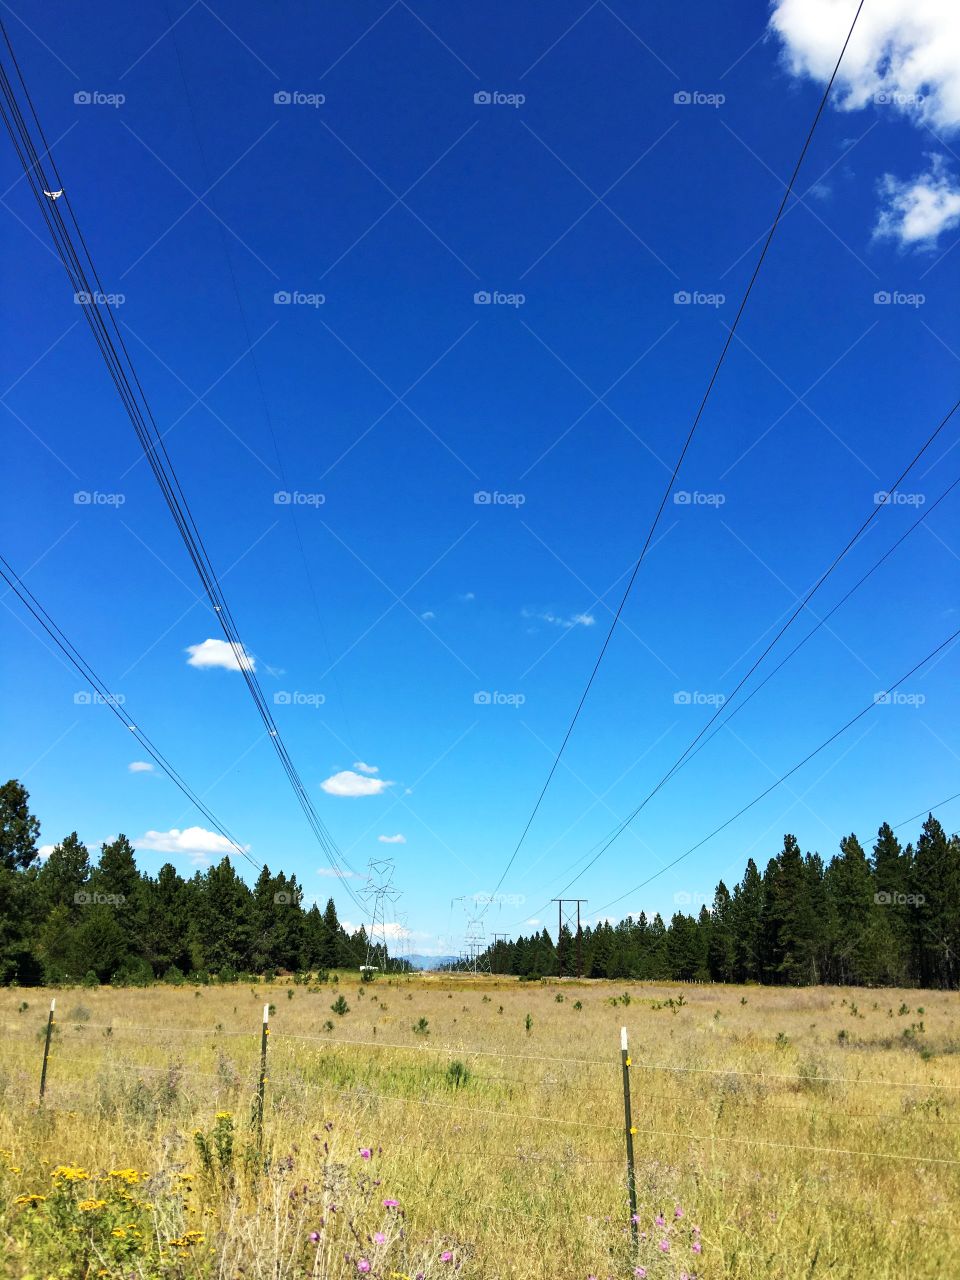 This photo captures a beautiful field lined with pine trees and wildflowers with electric lines overhead.